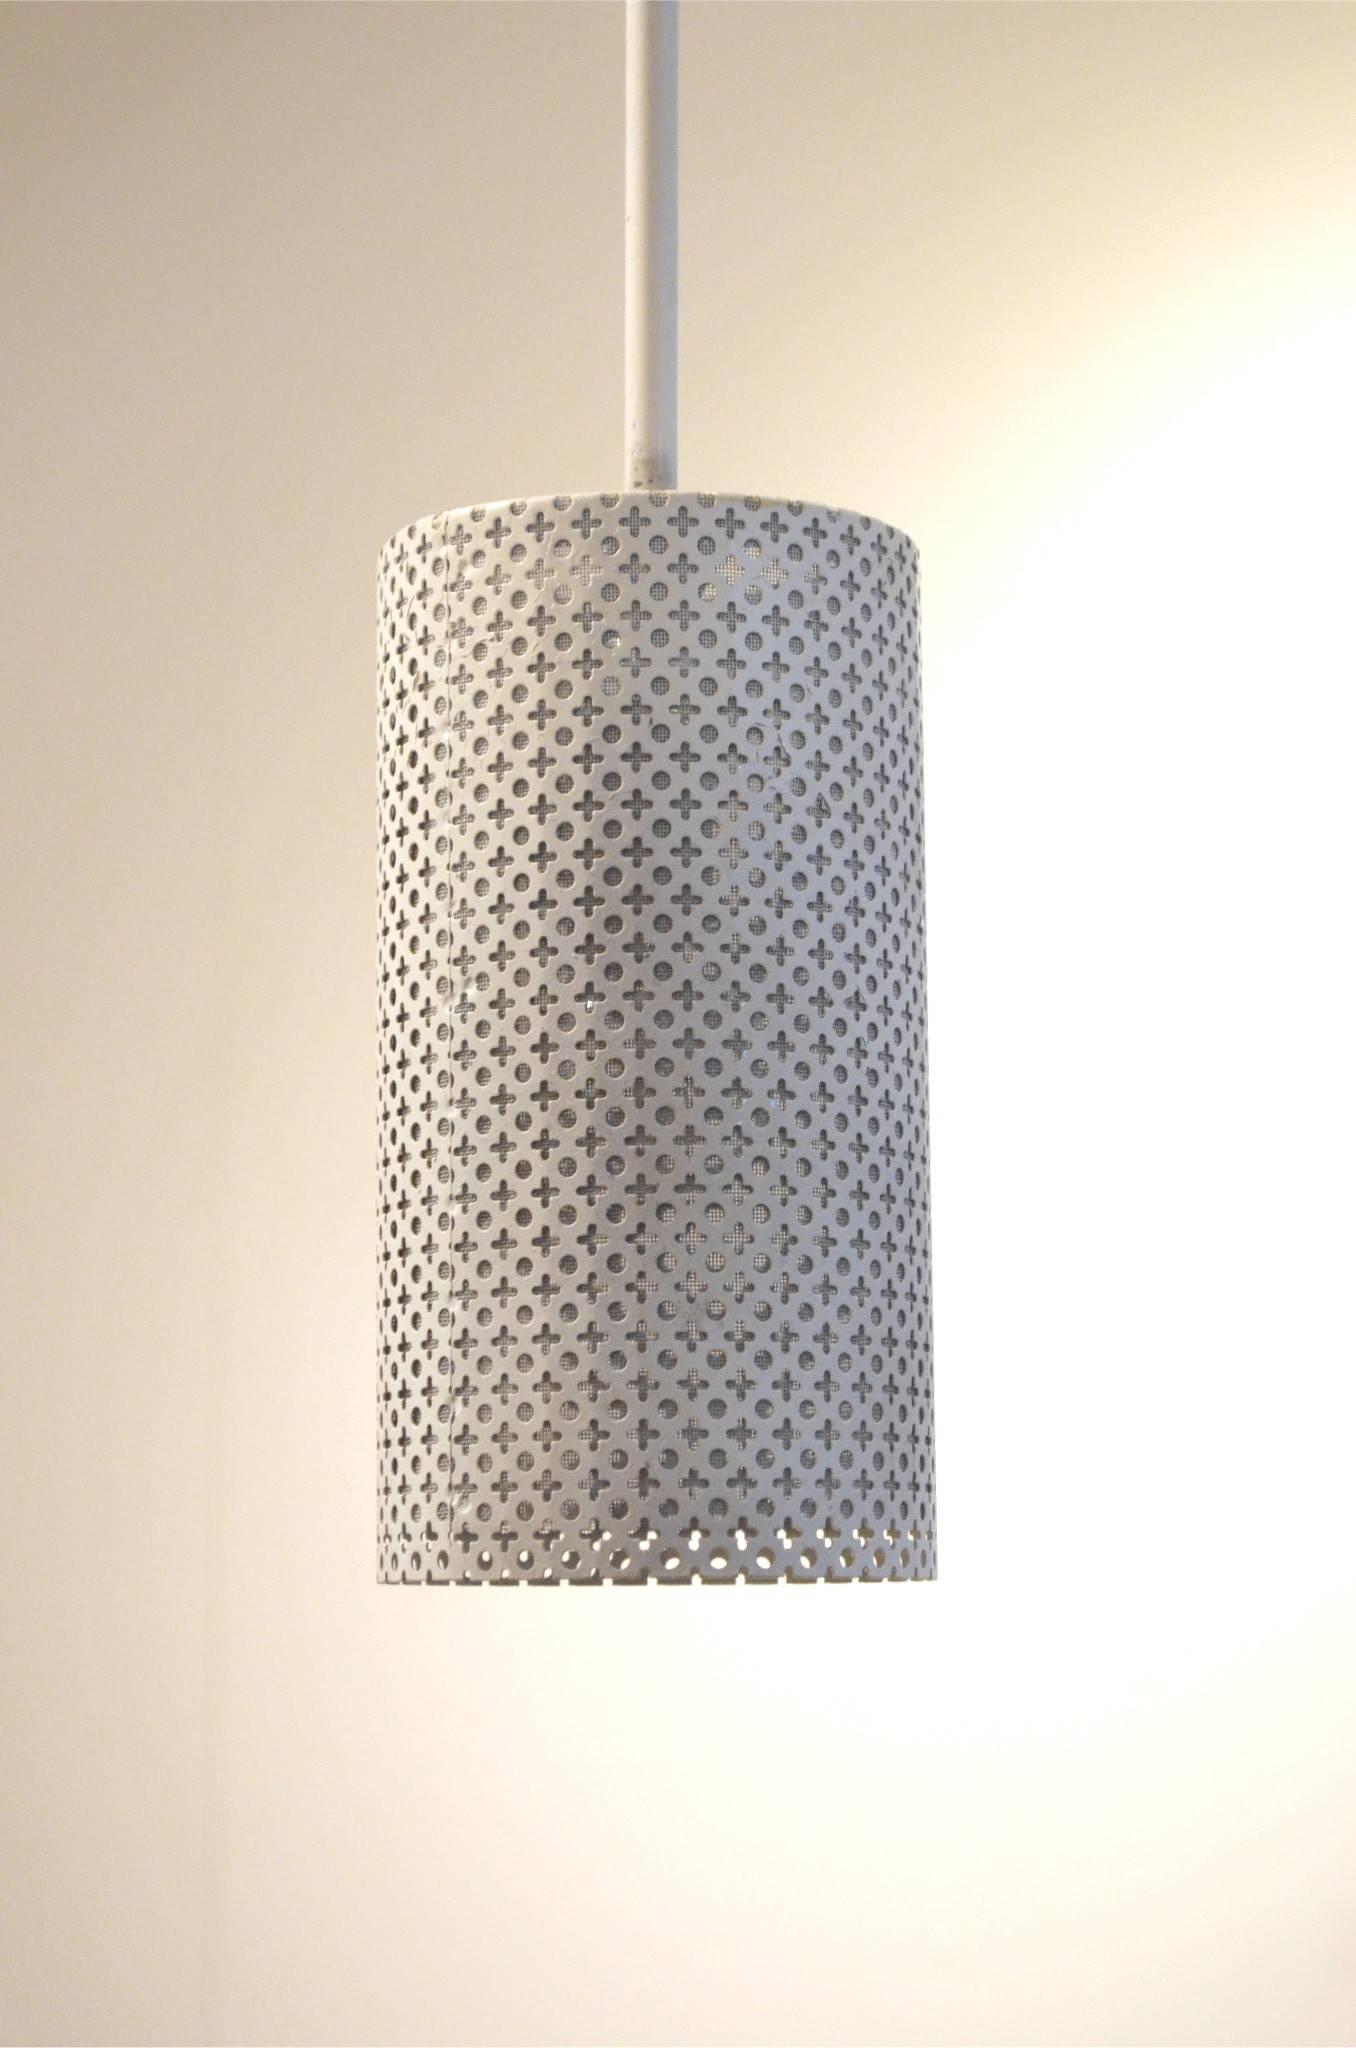 Minimalist Midcentury Design White Perforated Metal Lamp by Pierre Guariche For Sale 2